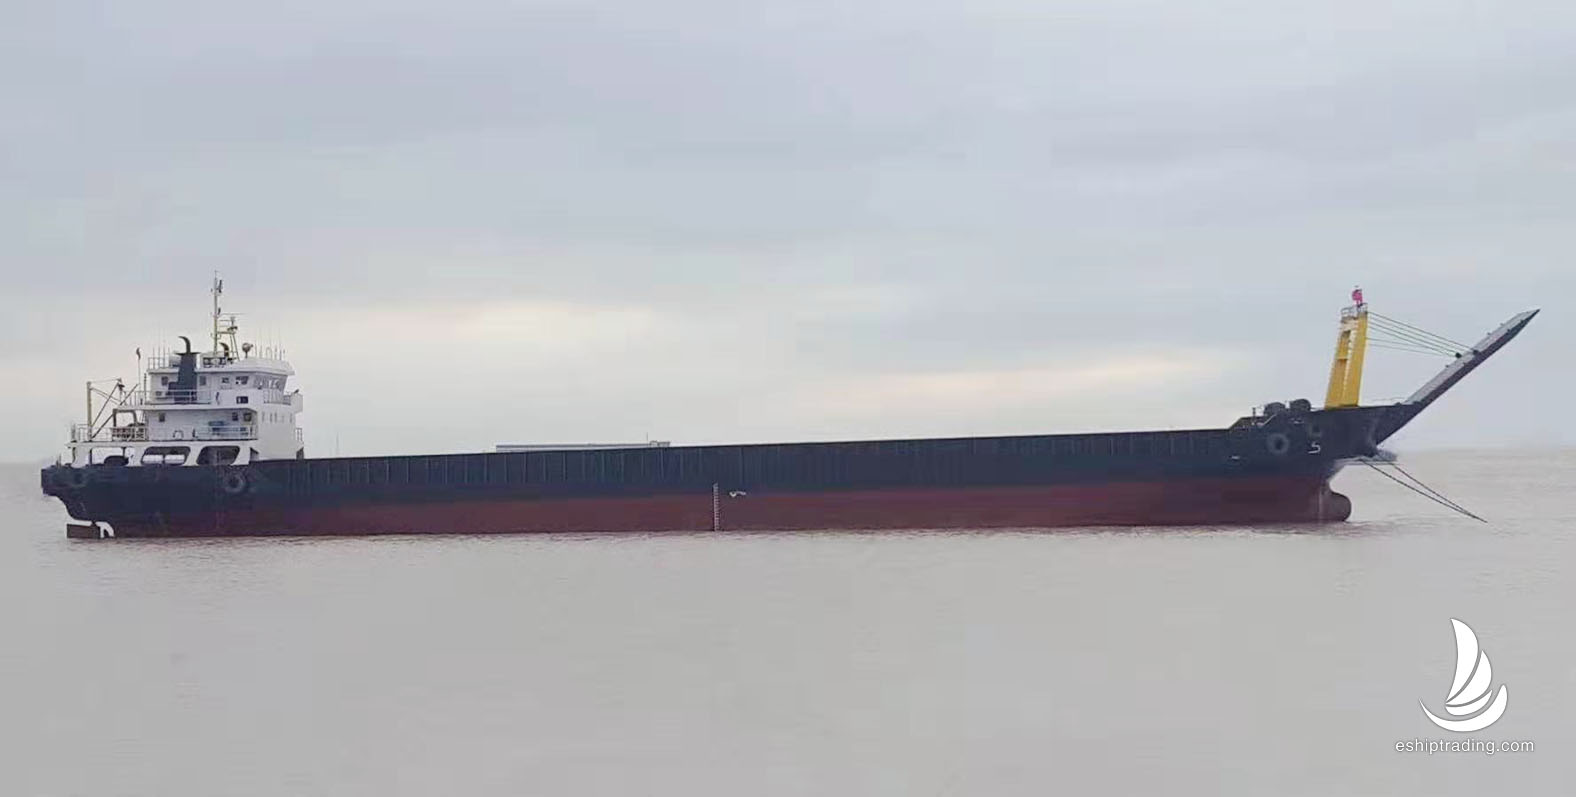 3530 T Deck Barge/LCT For Sale